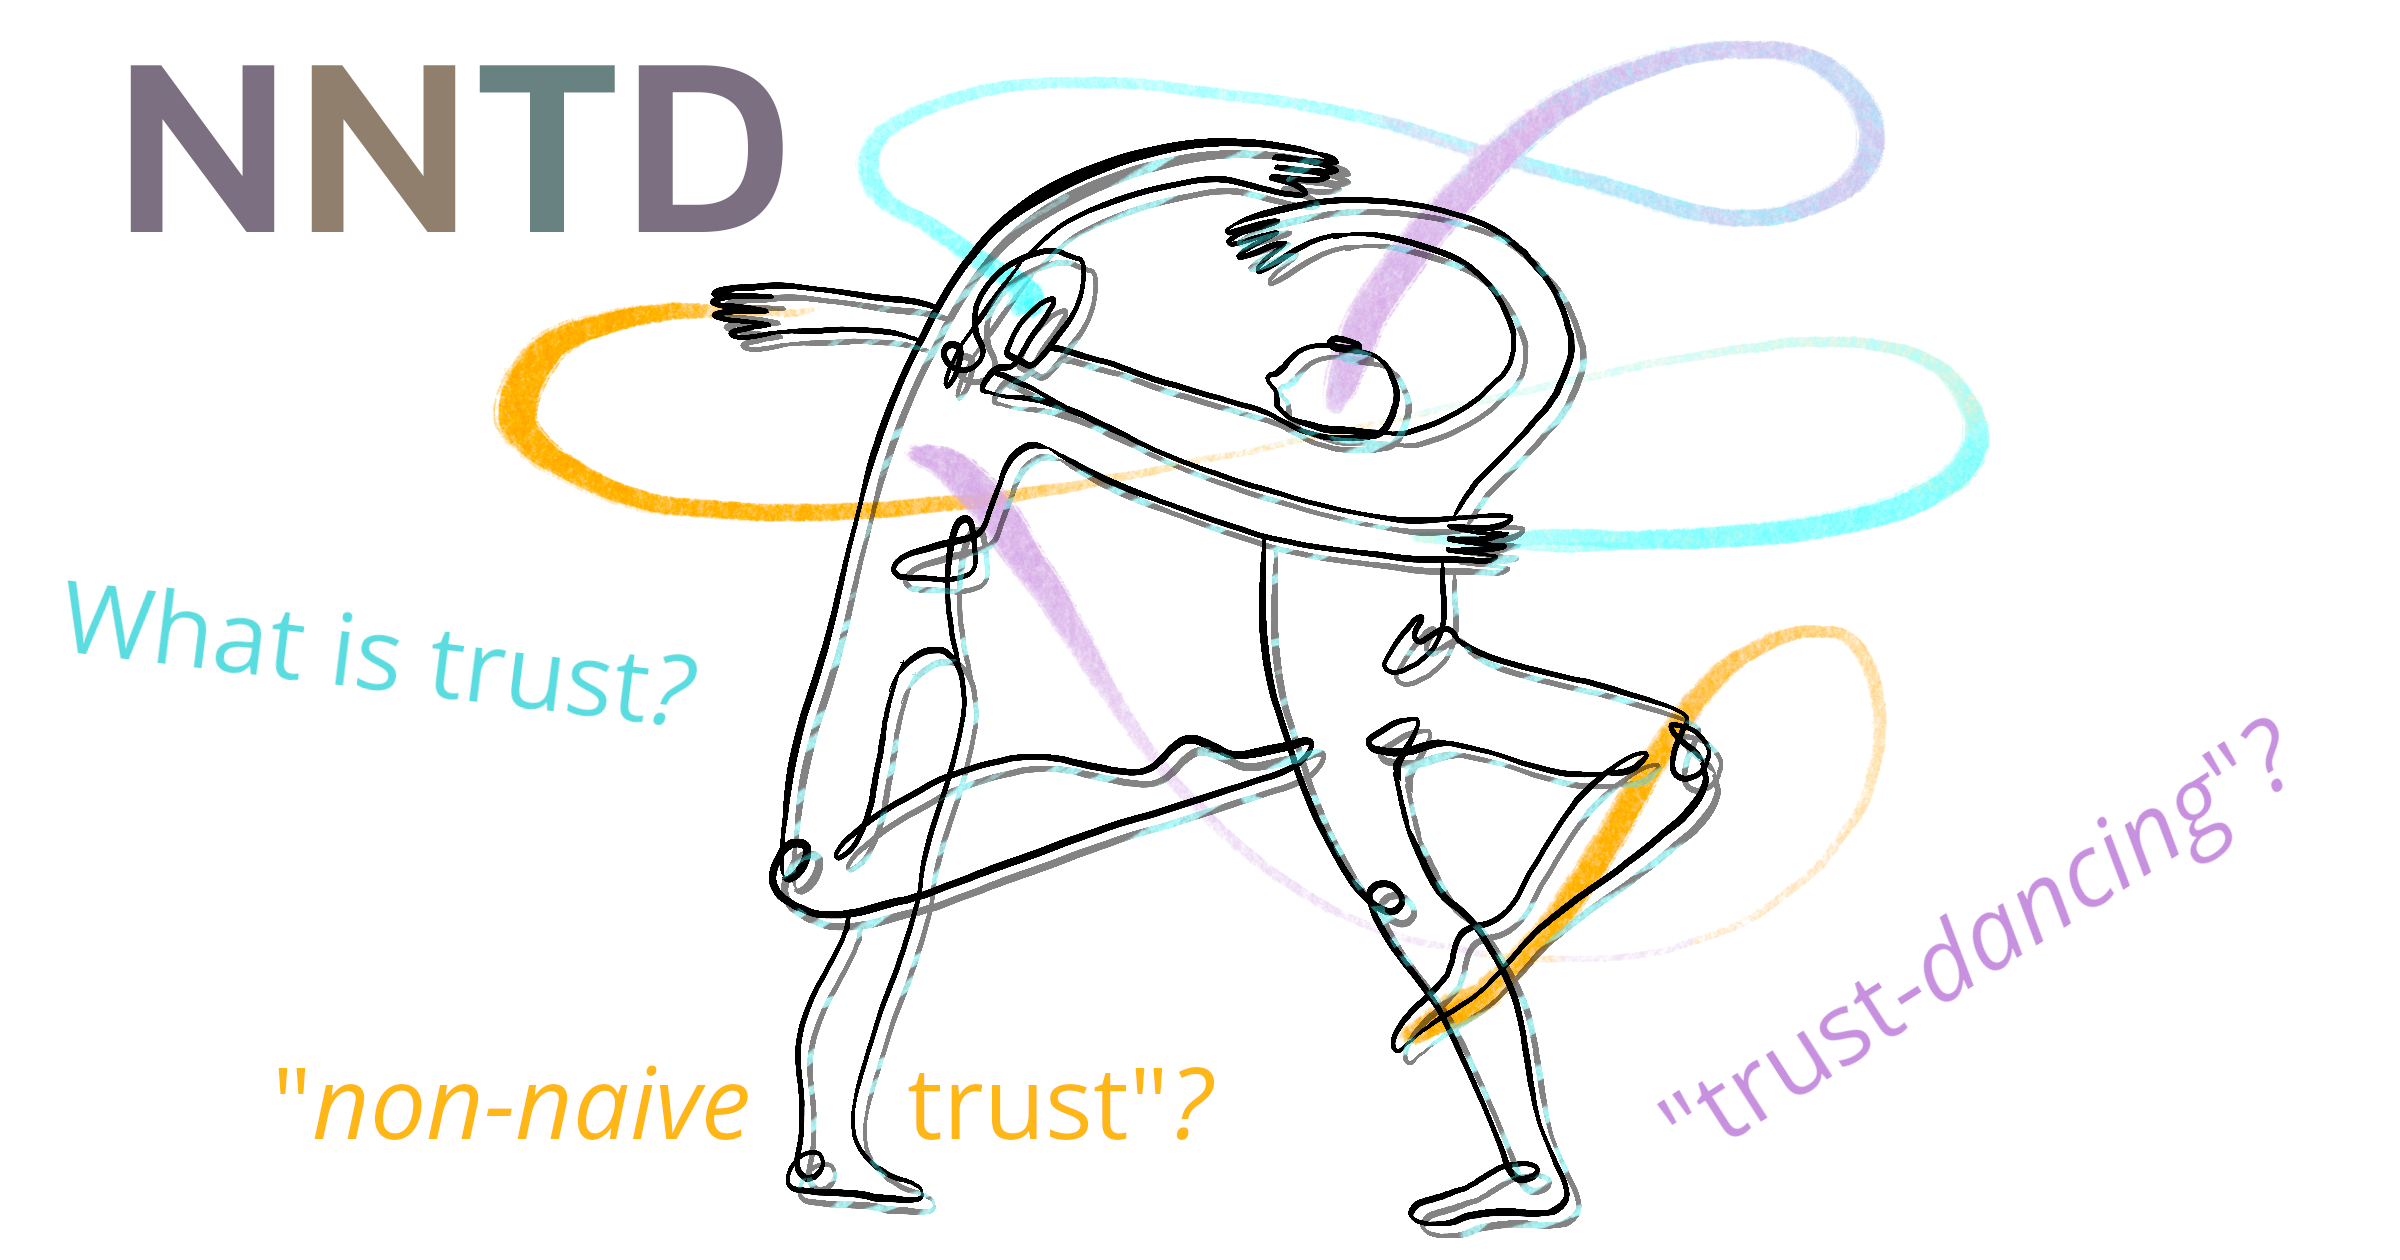 a graphic of two people dancing, with those questions overlaid